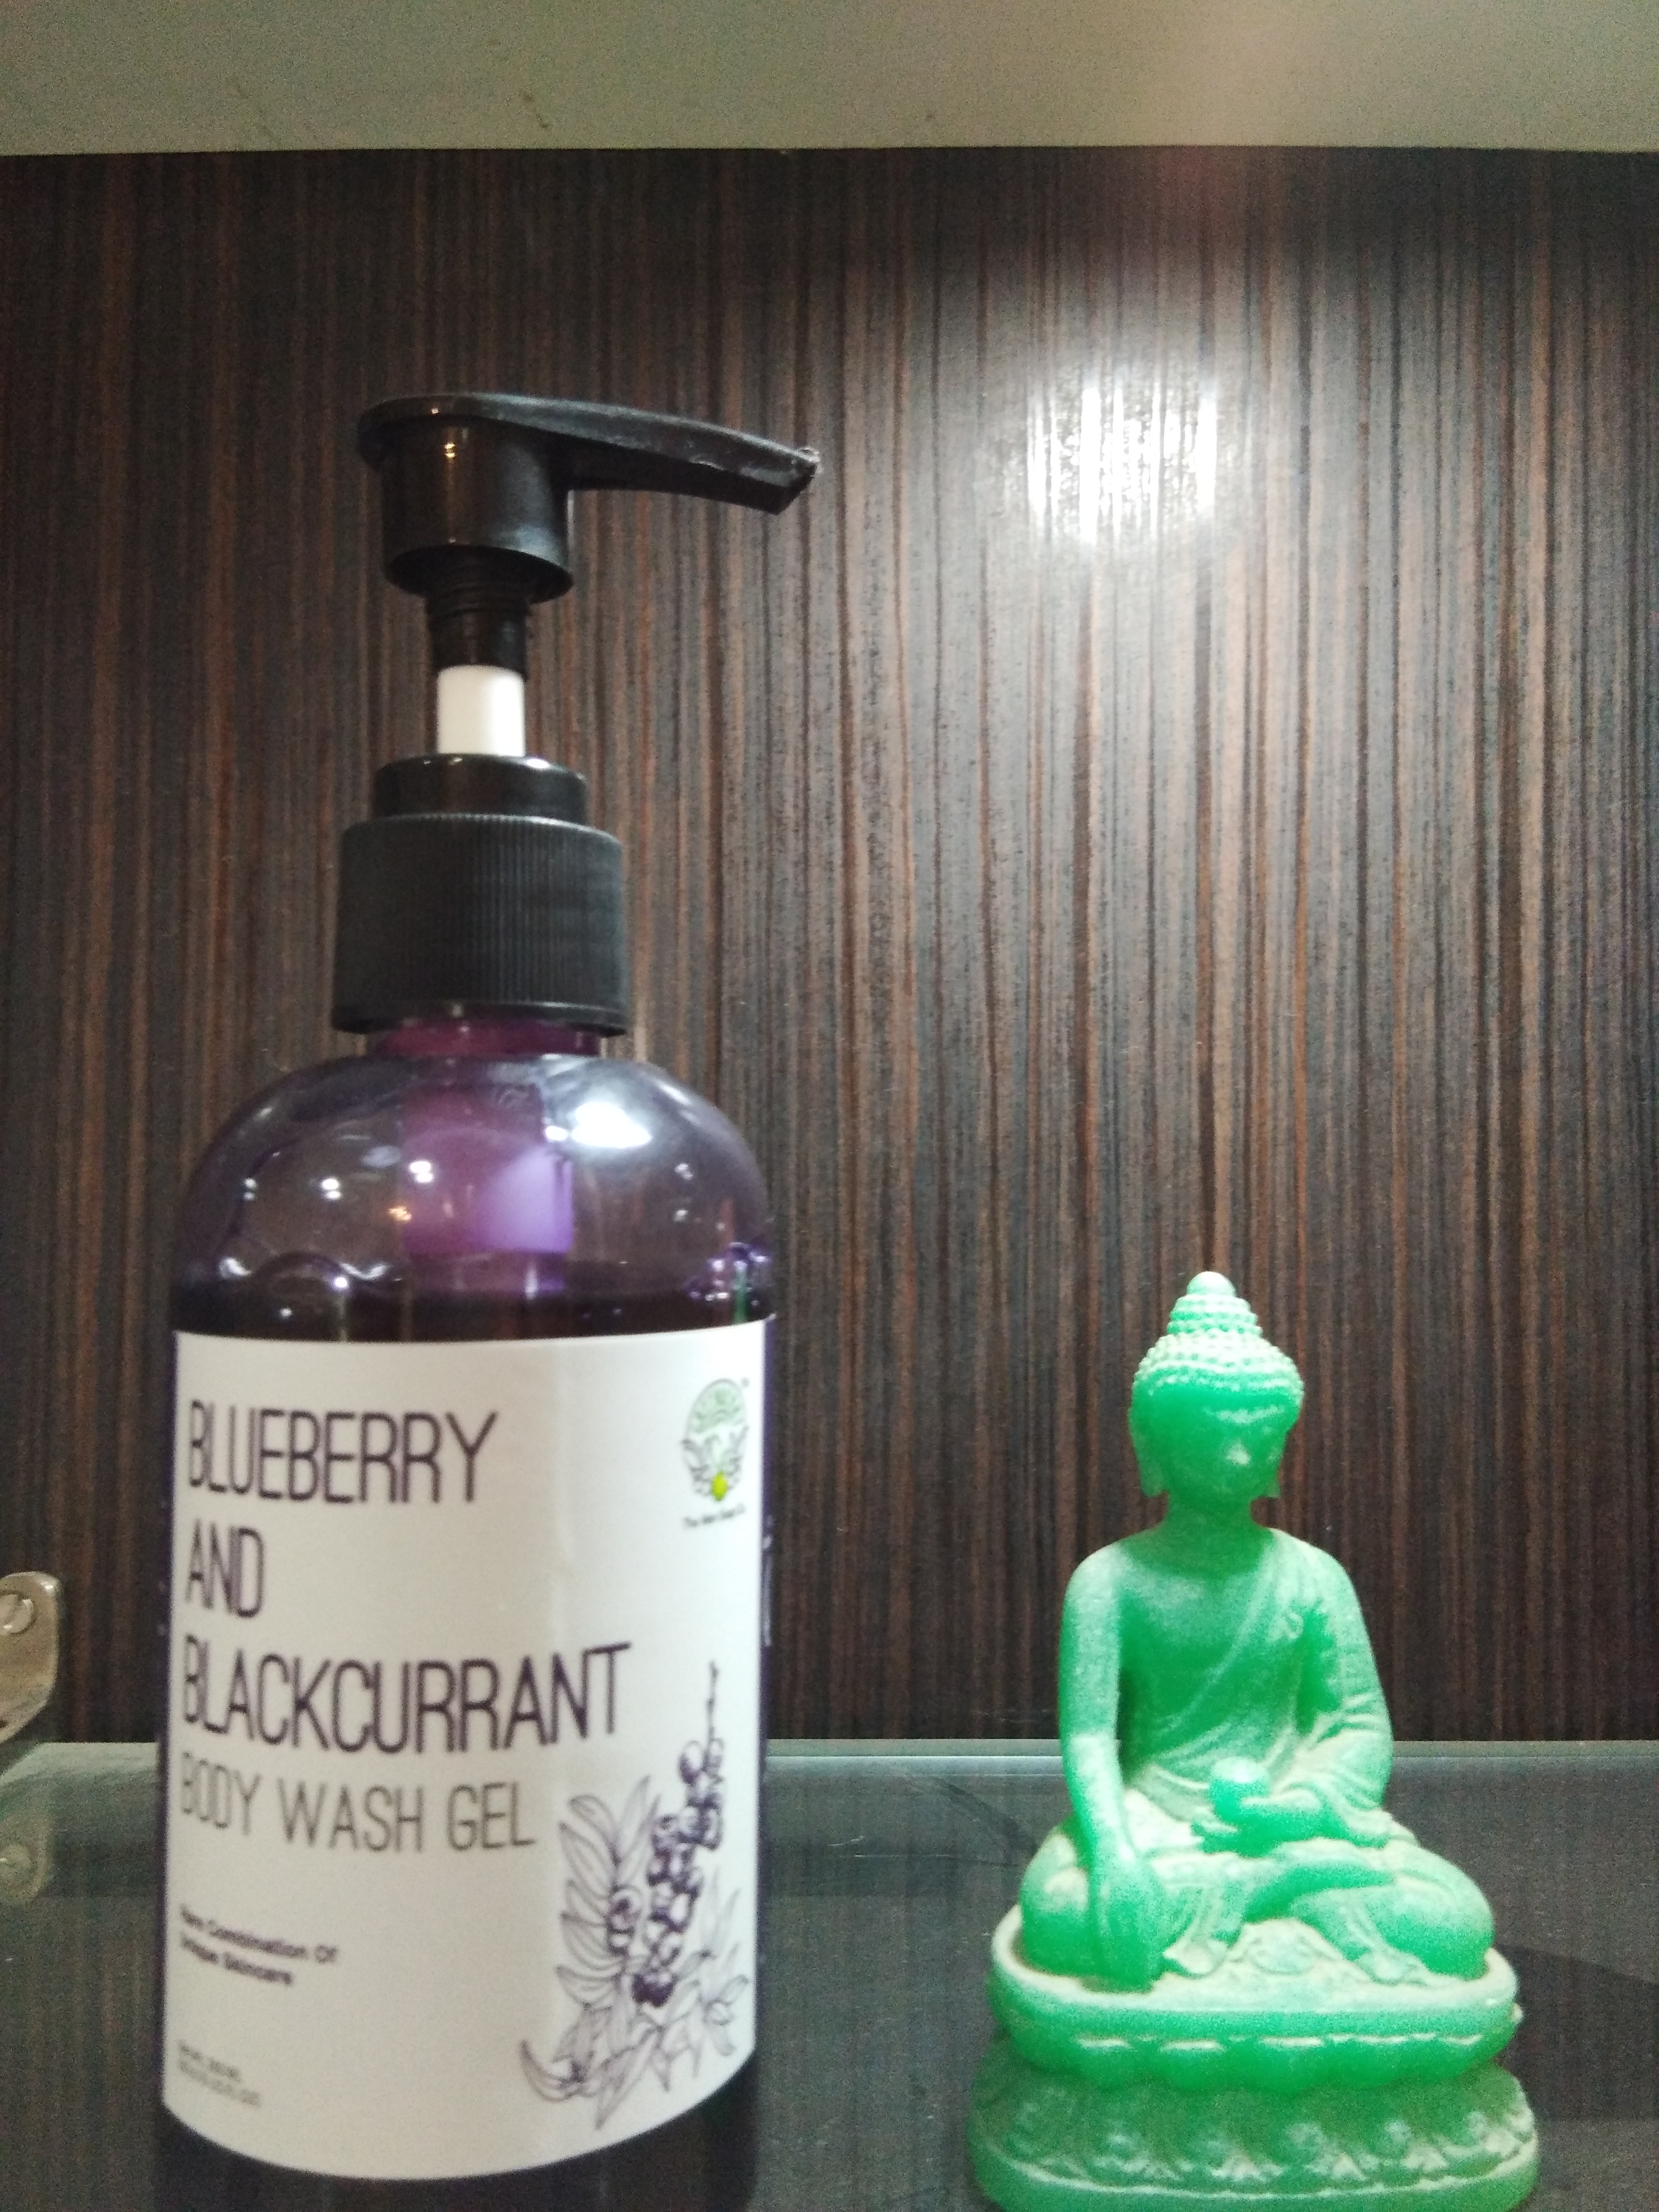 GreenBerry Organics Blueberry And Blackcurrant Body Wash Gel — VanityHues image